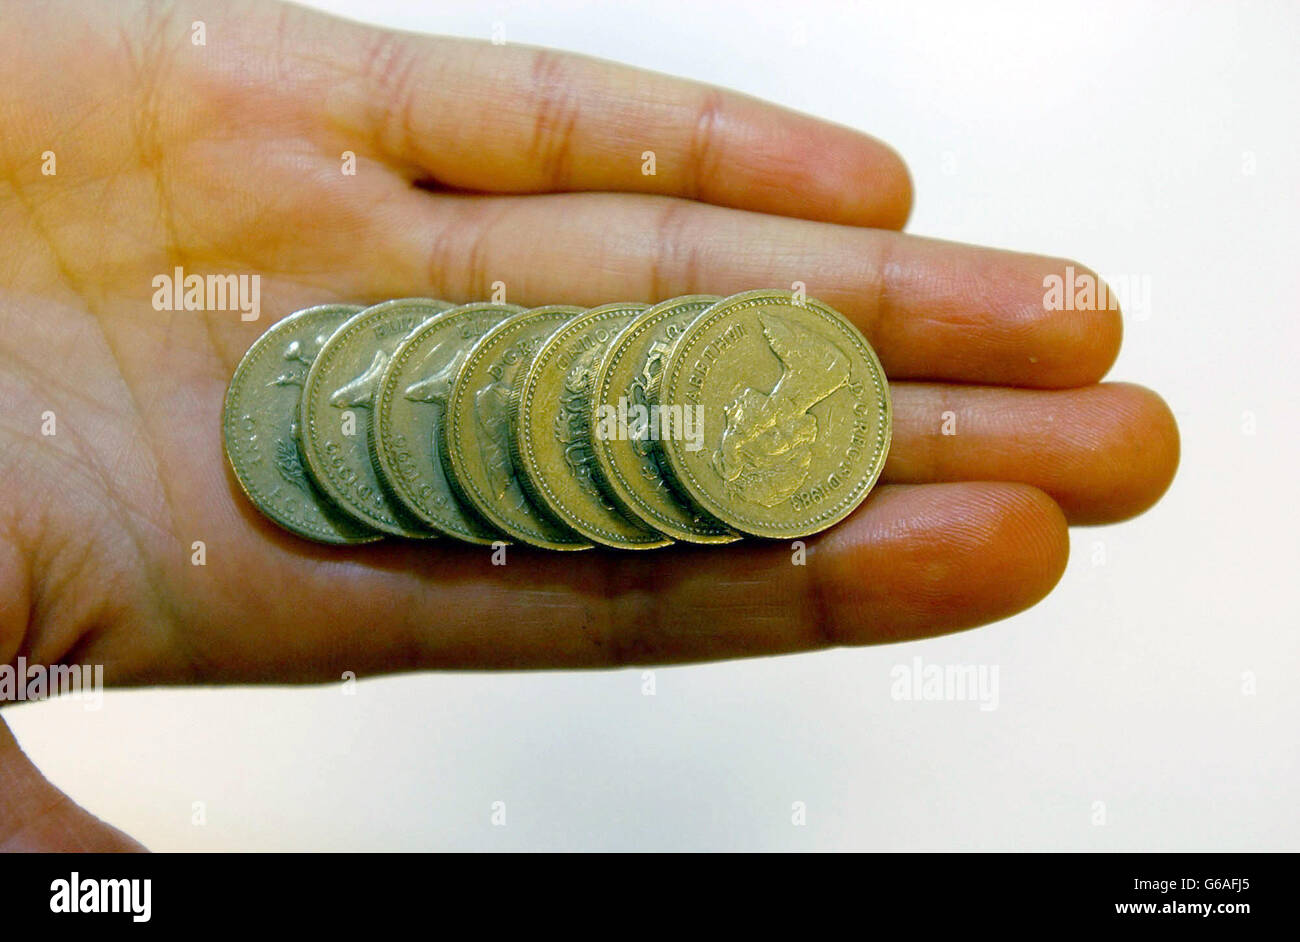 Stock picture of English One Pound Coins. 29/7/04: The Bank of England will release figures showing consumers now collectively owe more than 1 trillion. The money is owed through a combination of mortgages, personal loans, overdrafts, hire purchase agreements and on credit and store cards. Stock Photo